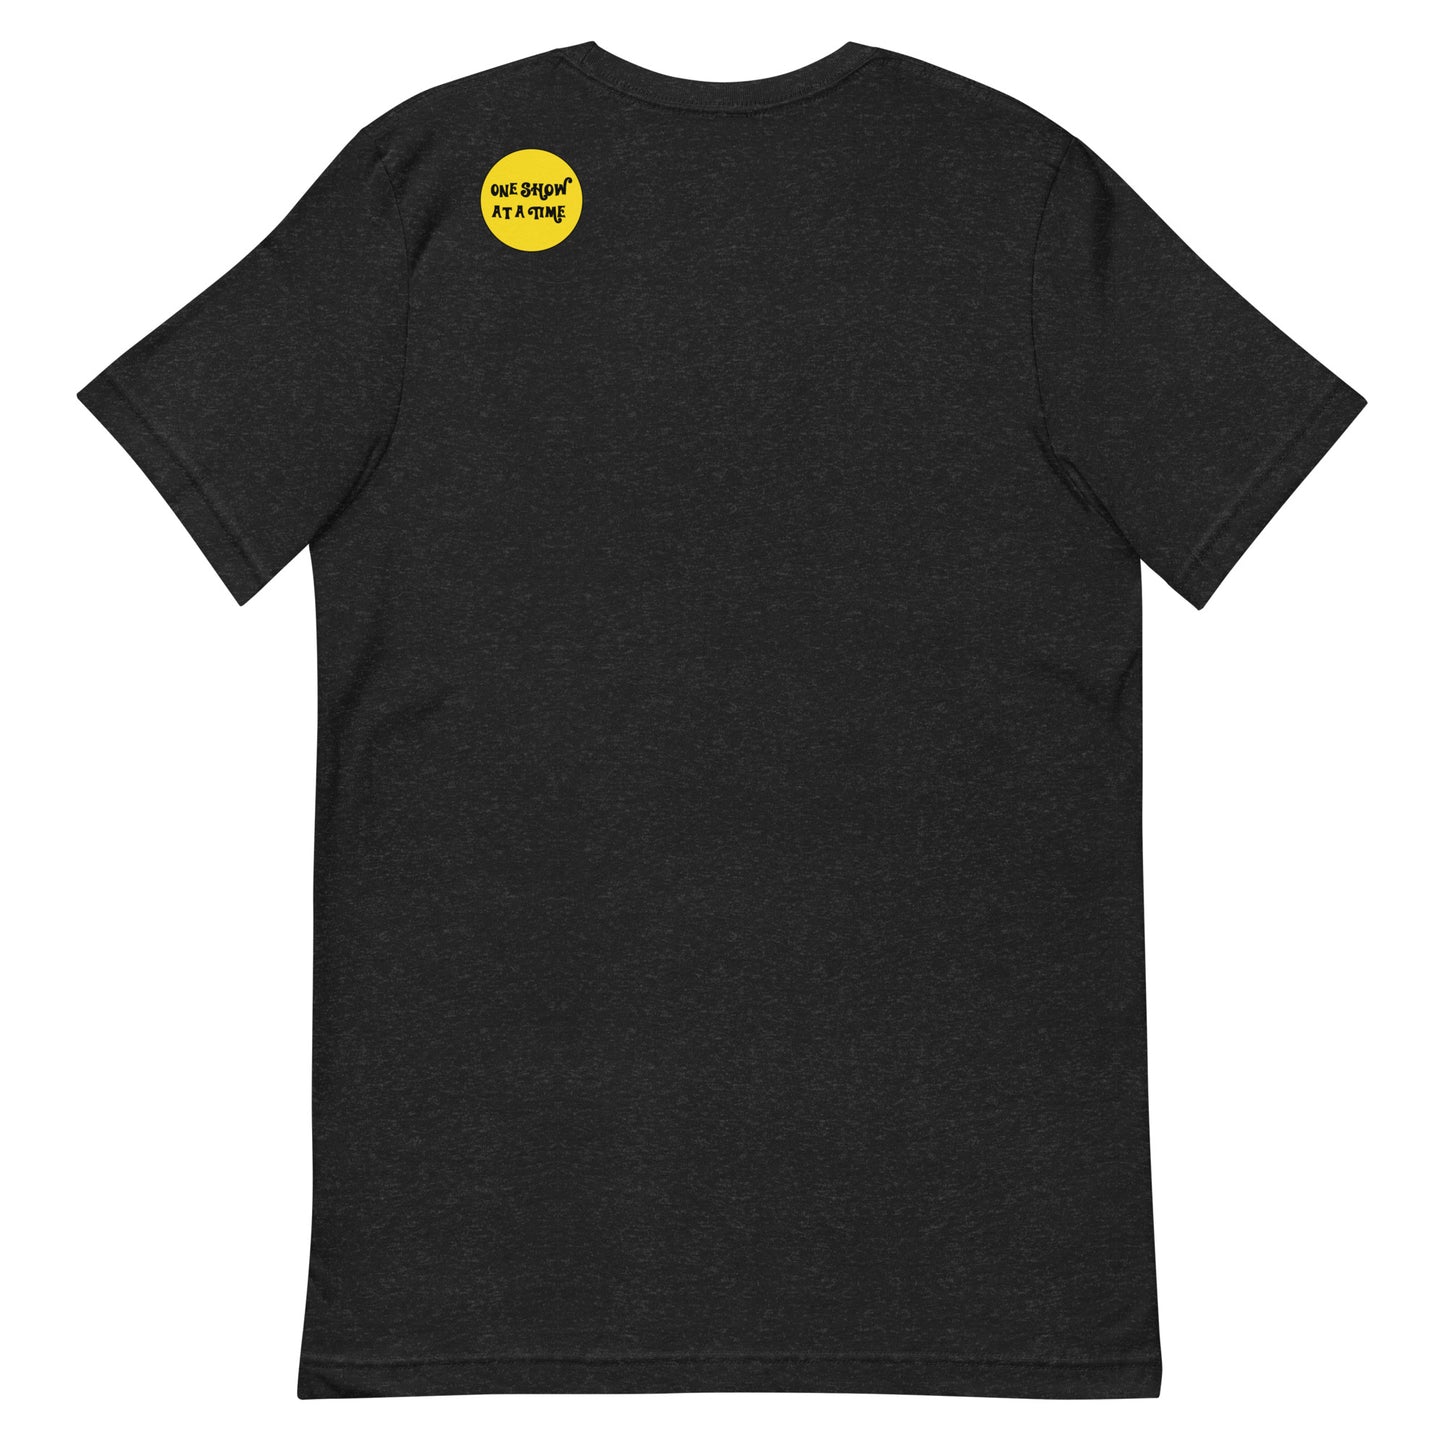 The Much Obliged Podcast - A Yellow Balloon Experience - T shirt